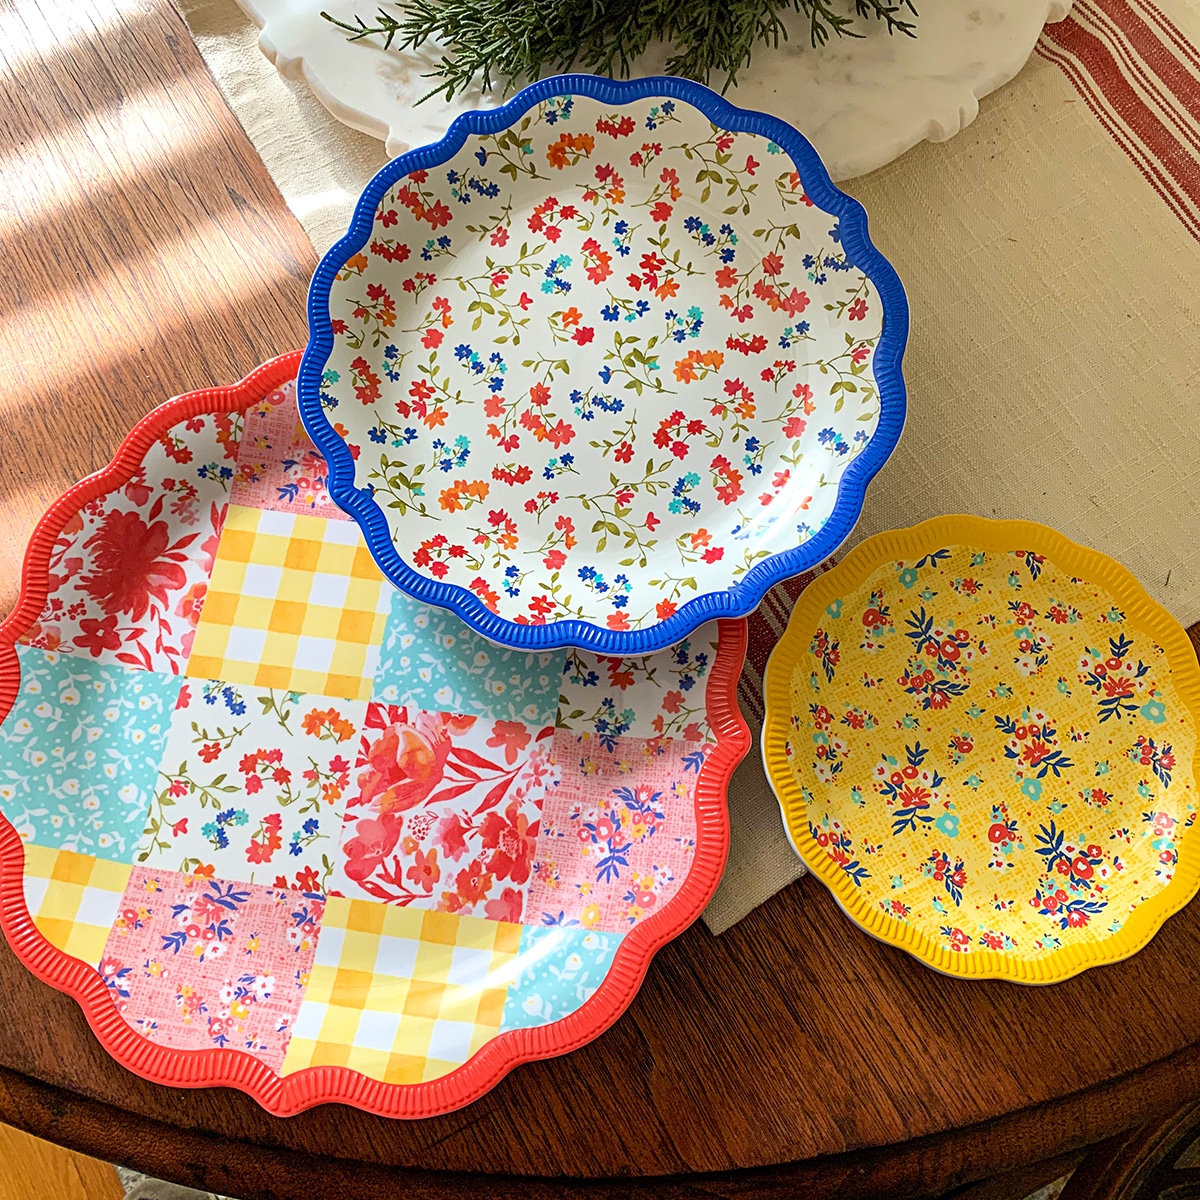 Pioneer Woman Patchwork Medley Melamine Dinner Plates used as a tiered serving tray.